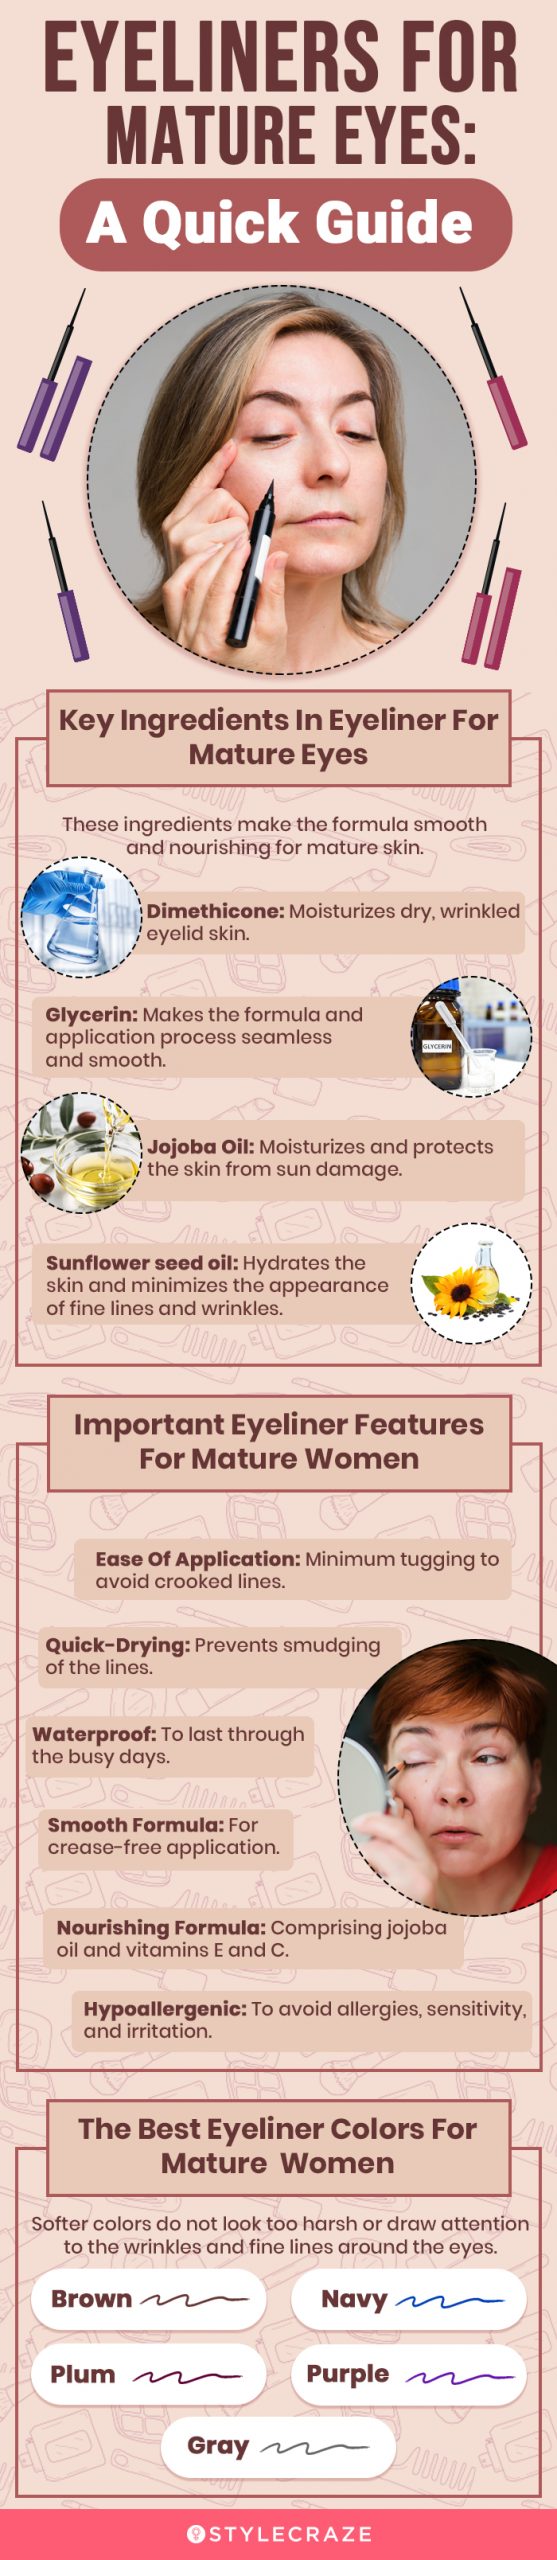 Eyeliners For Mature Eyes: A Quick Guide (infographic)